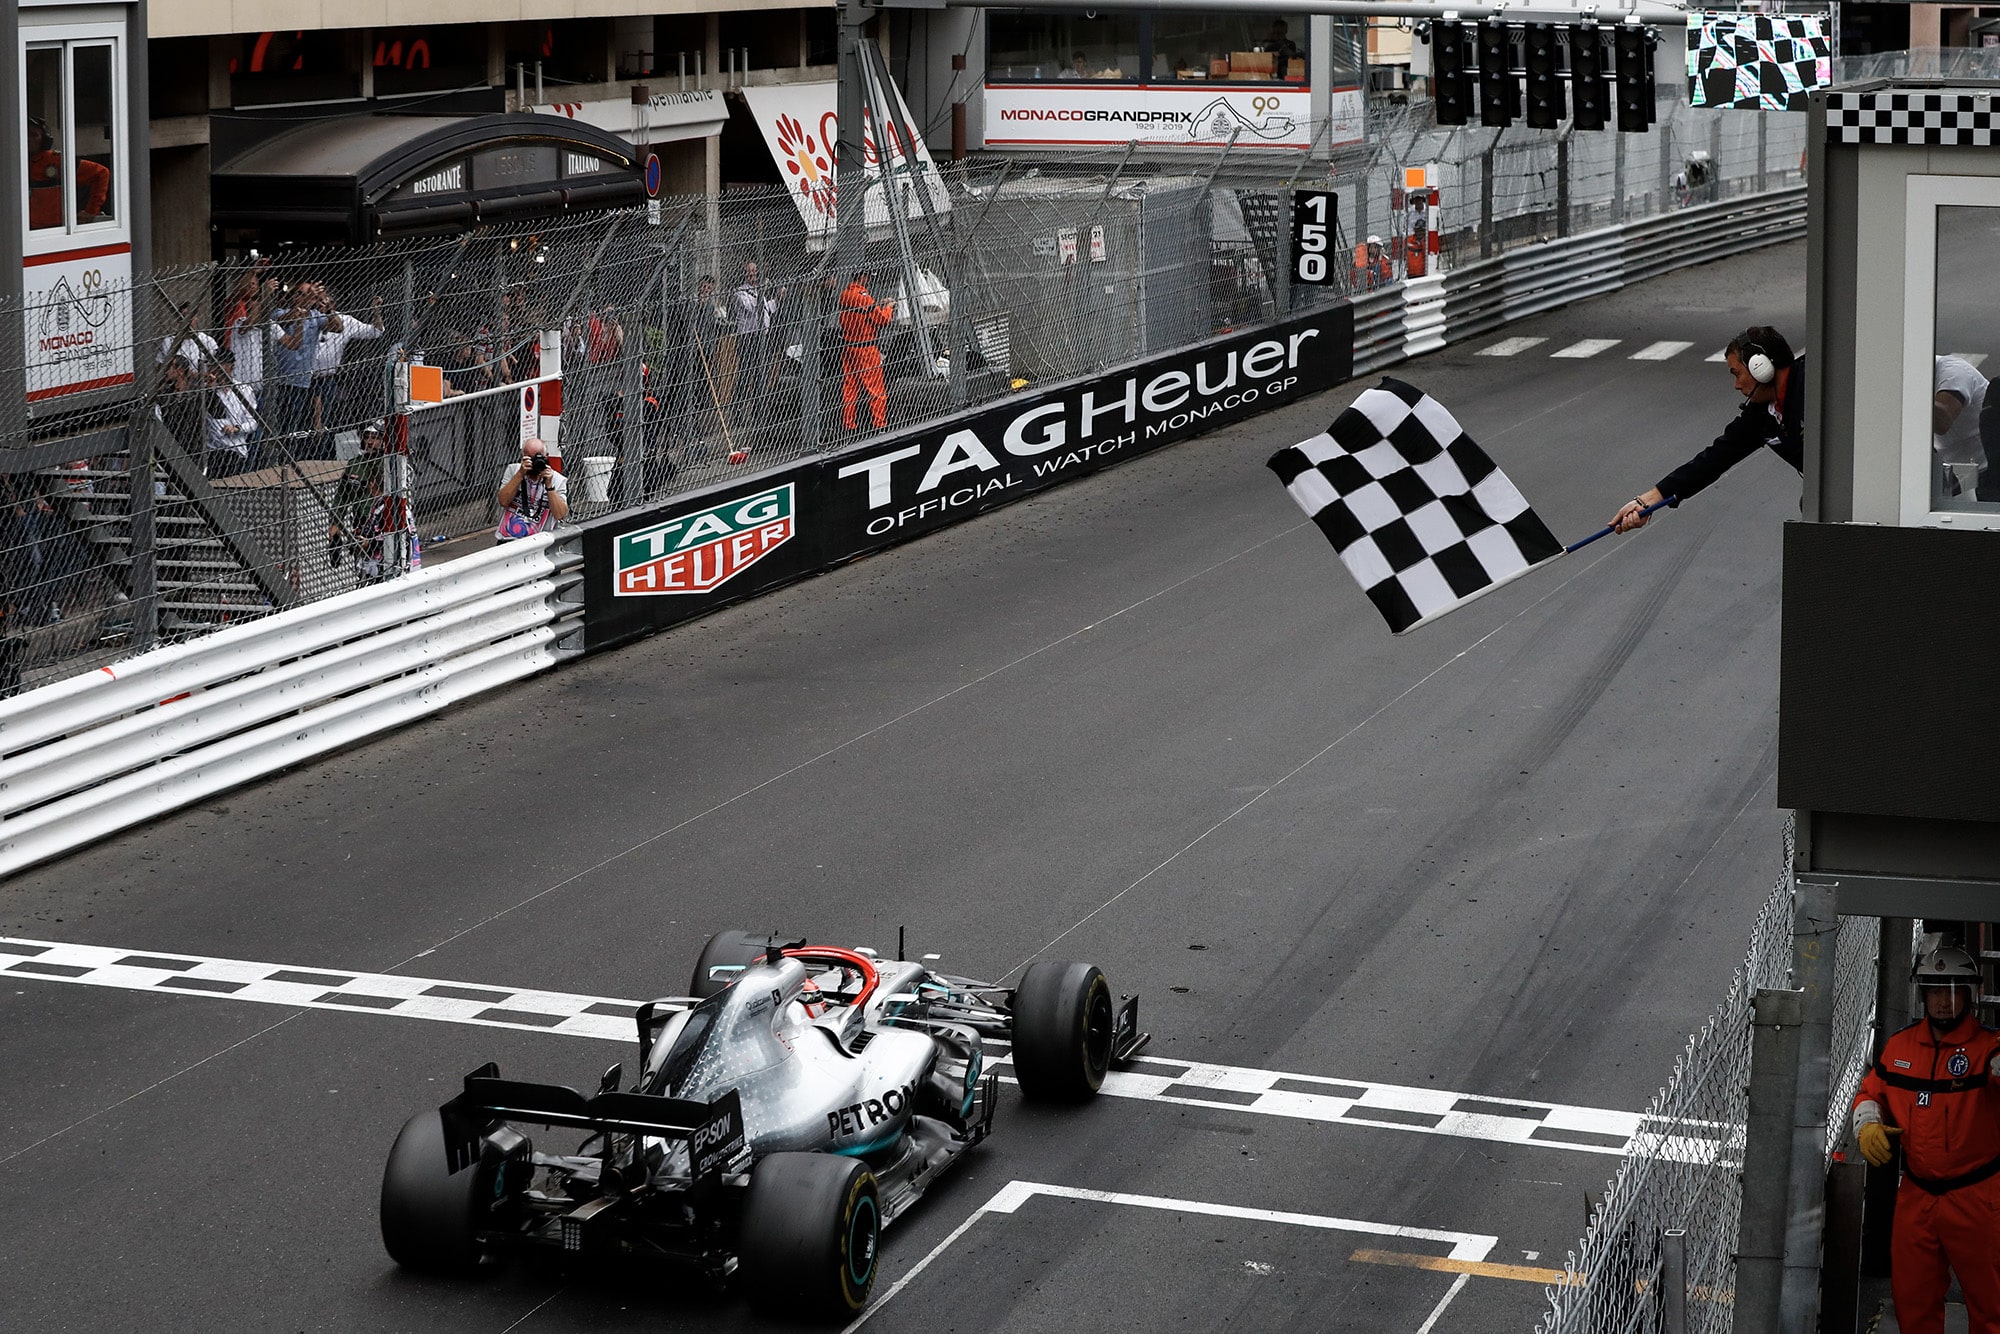 Chequered flag and light panel at the end of the 2019 Monaco Grand Prix